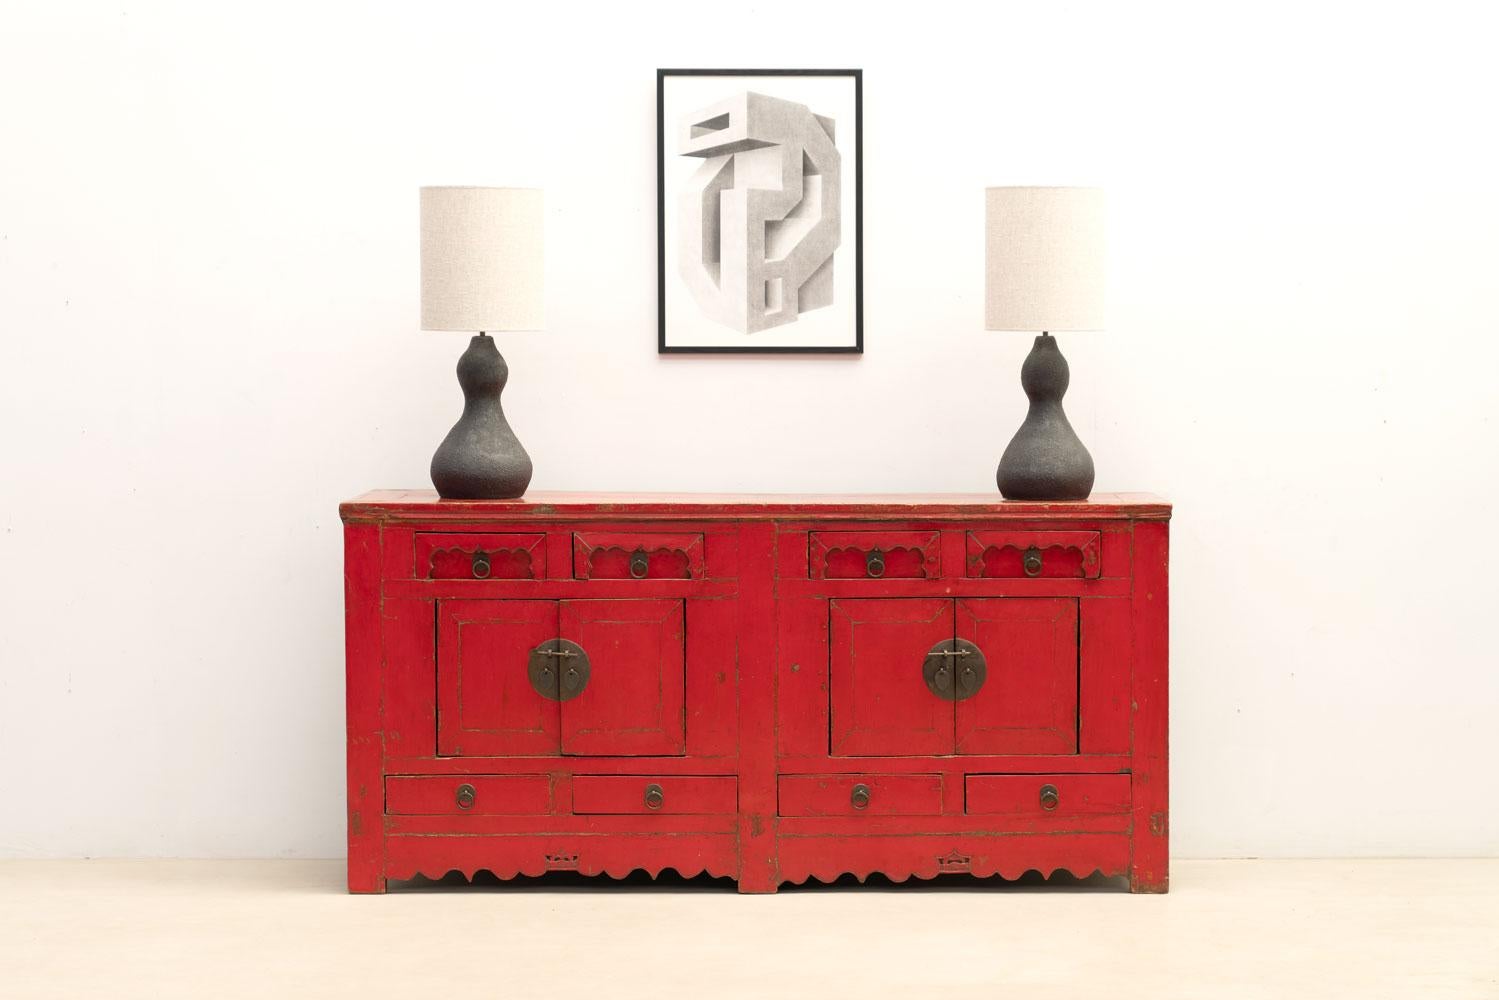  20th-century Asian decorative chest of drawers crafted from wood, adorned with a stunning red patina that adds warmth and character to any space.

Please do not hesitate to contact us for any additional information. We would be more than delighted